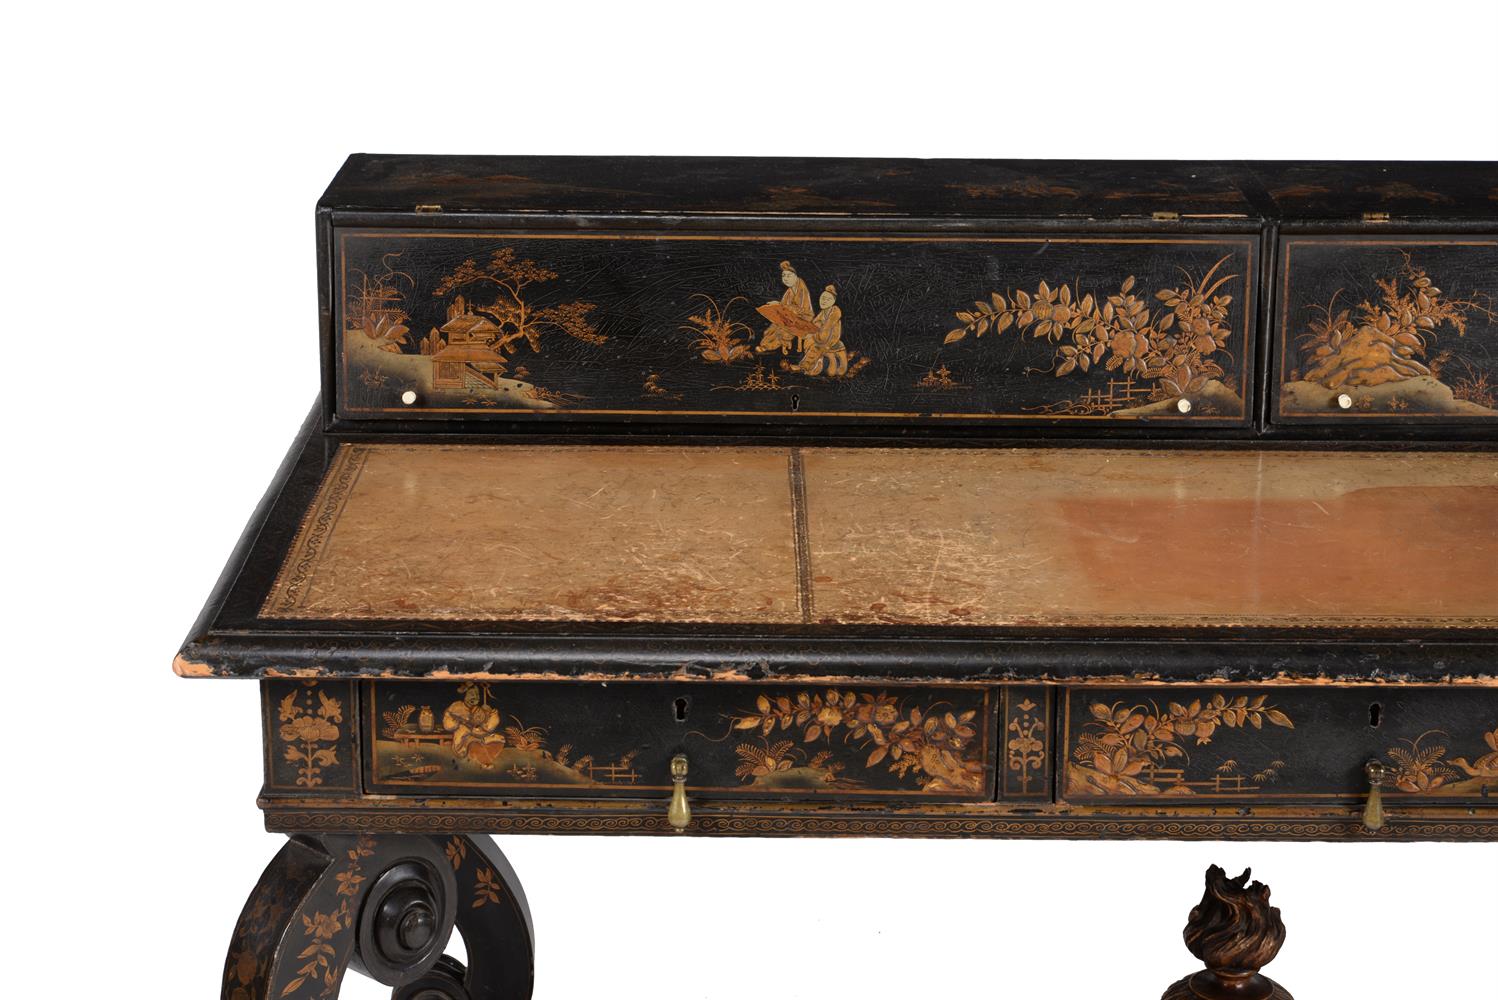 A Regency black lacquered and gilt chinoiserie decorated desk - Image 6 of 6